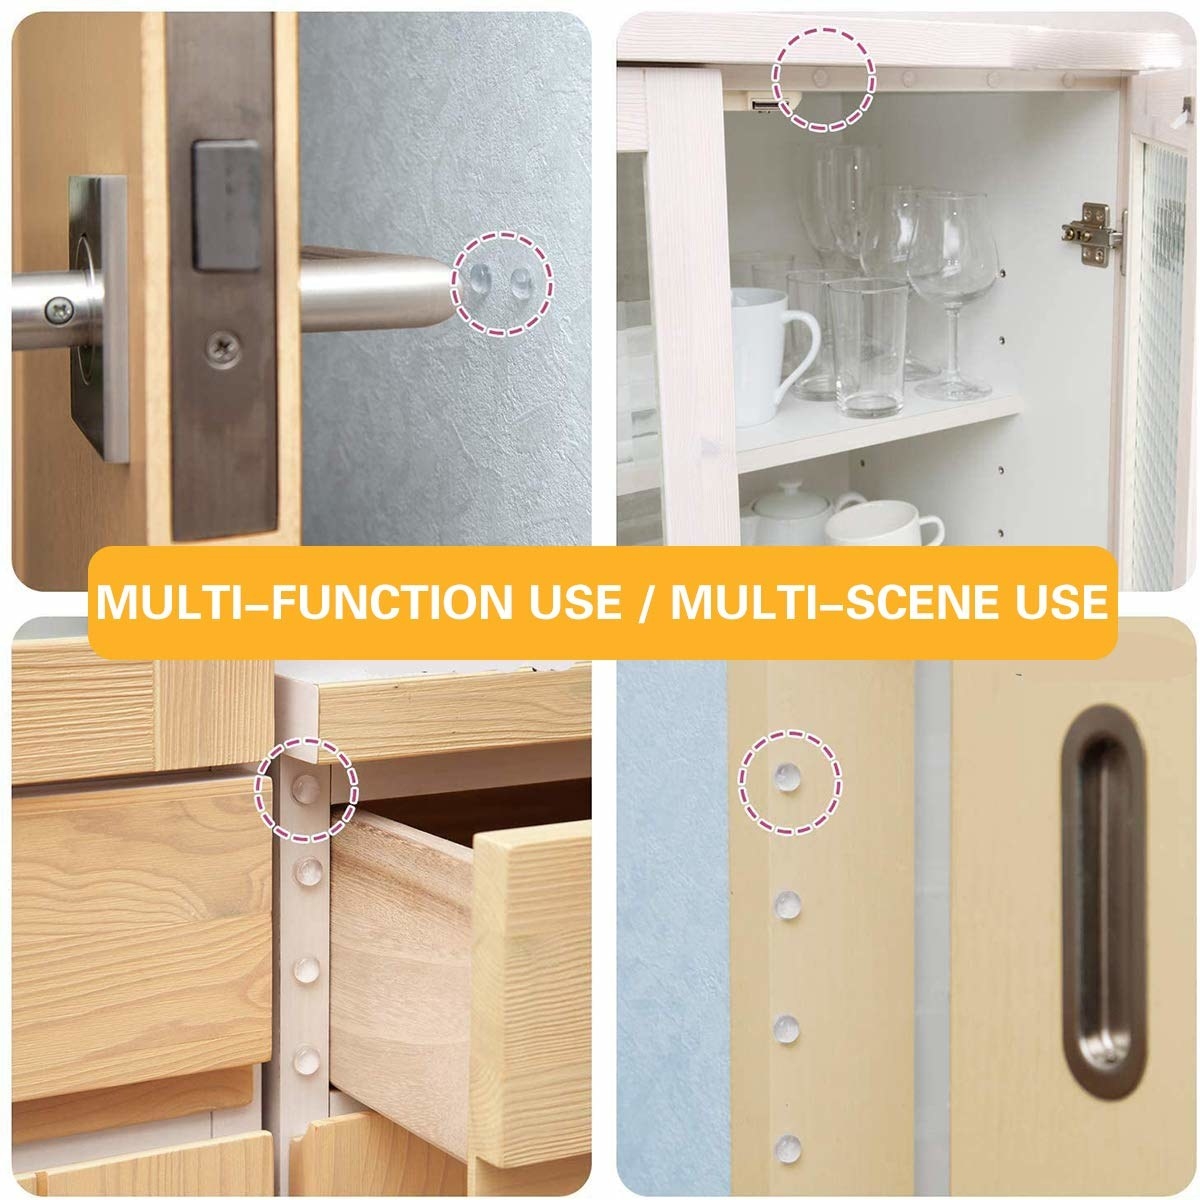 Collage of various uses of the sound dampeners, such as on doors and cabinets. Text reads: “Multi-function use/multi-scene use”.